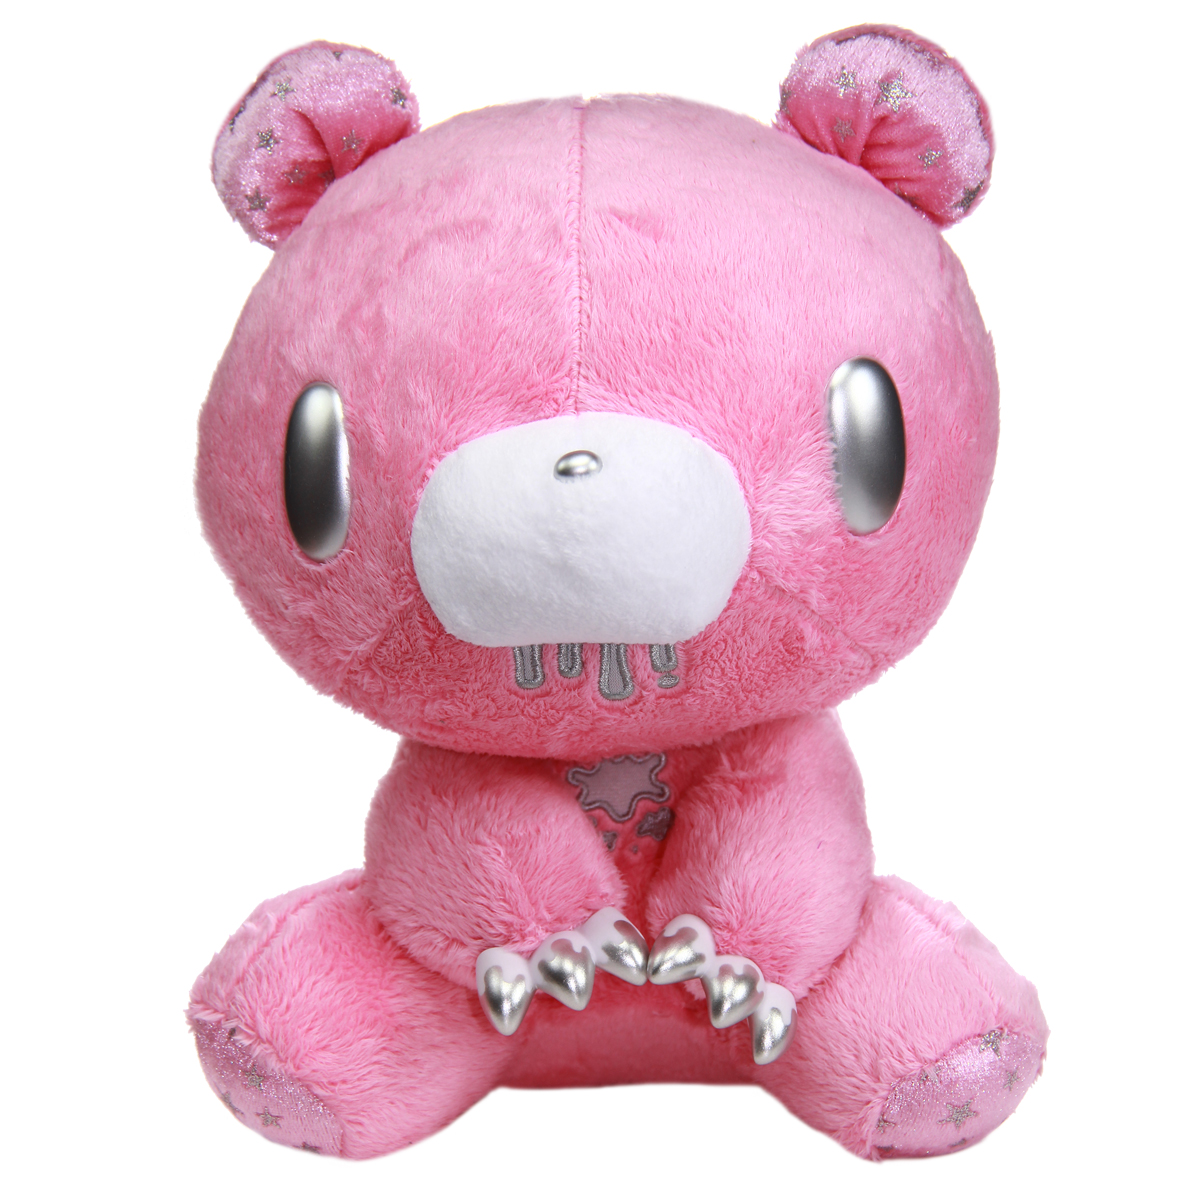 Taito Starry Edition Gloomy Bear Plush Doll Pink GP #528 12 Inches